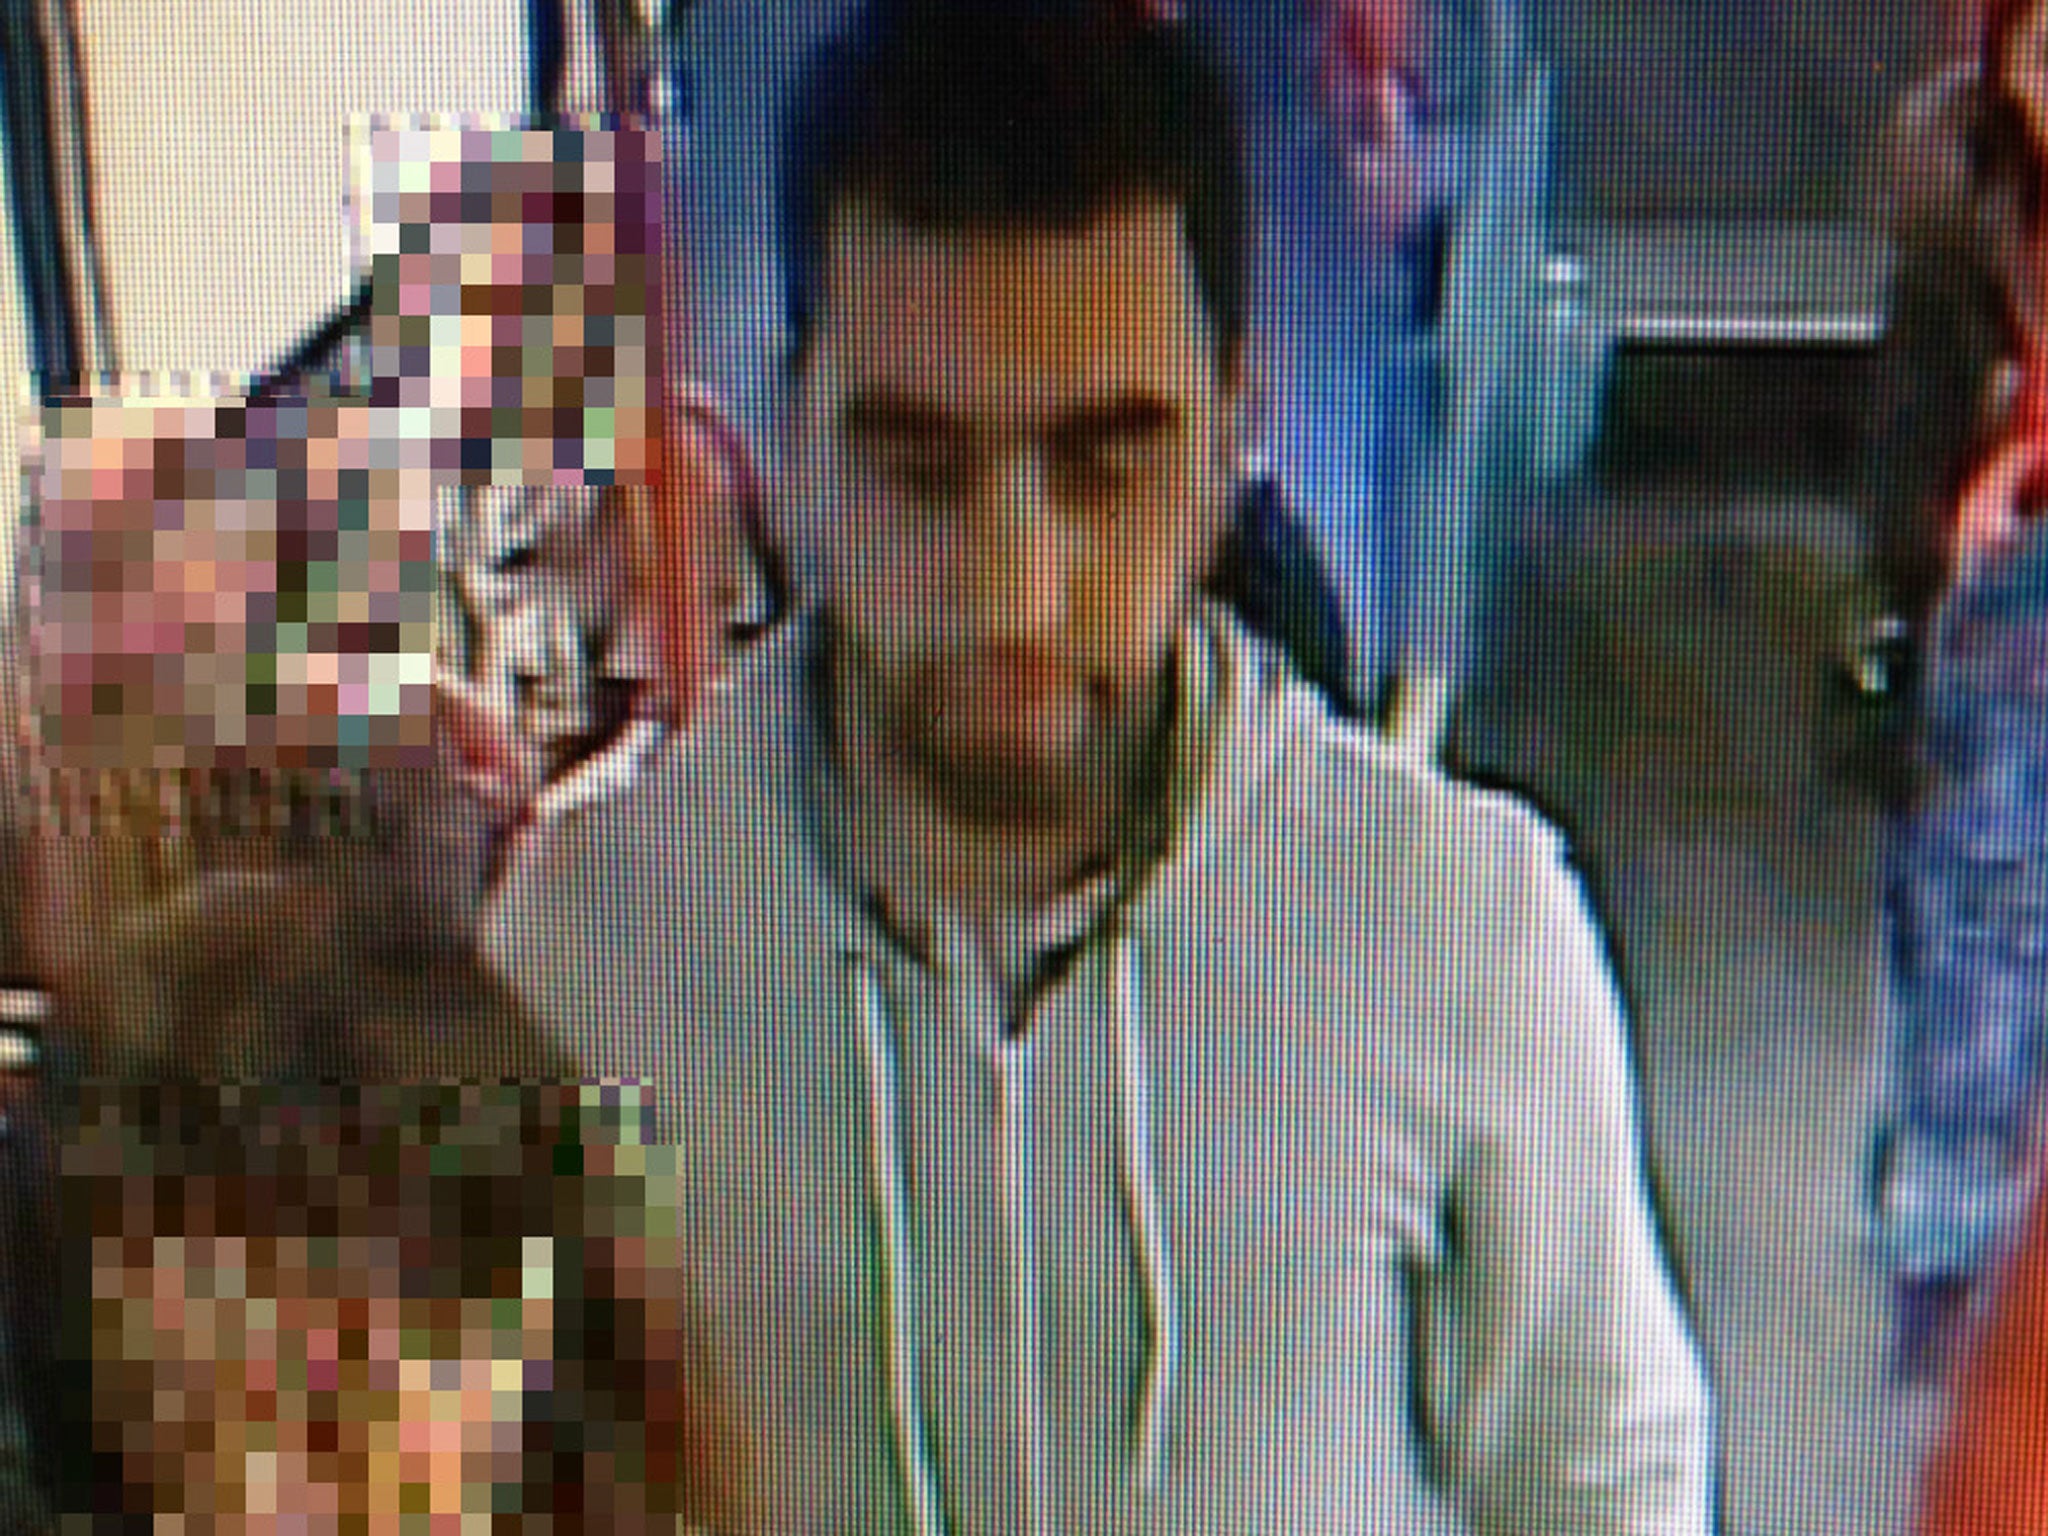 The man is described as Asian, 5ft 6ins tall, slim build and in his 20s. He was wearing a grey jumper with black tracksuit bottoms and had black hair and a small goatee beard.